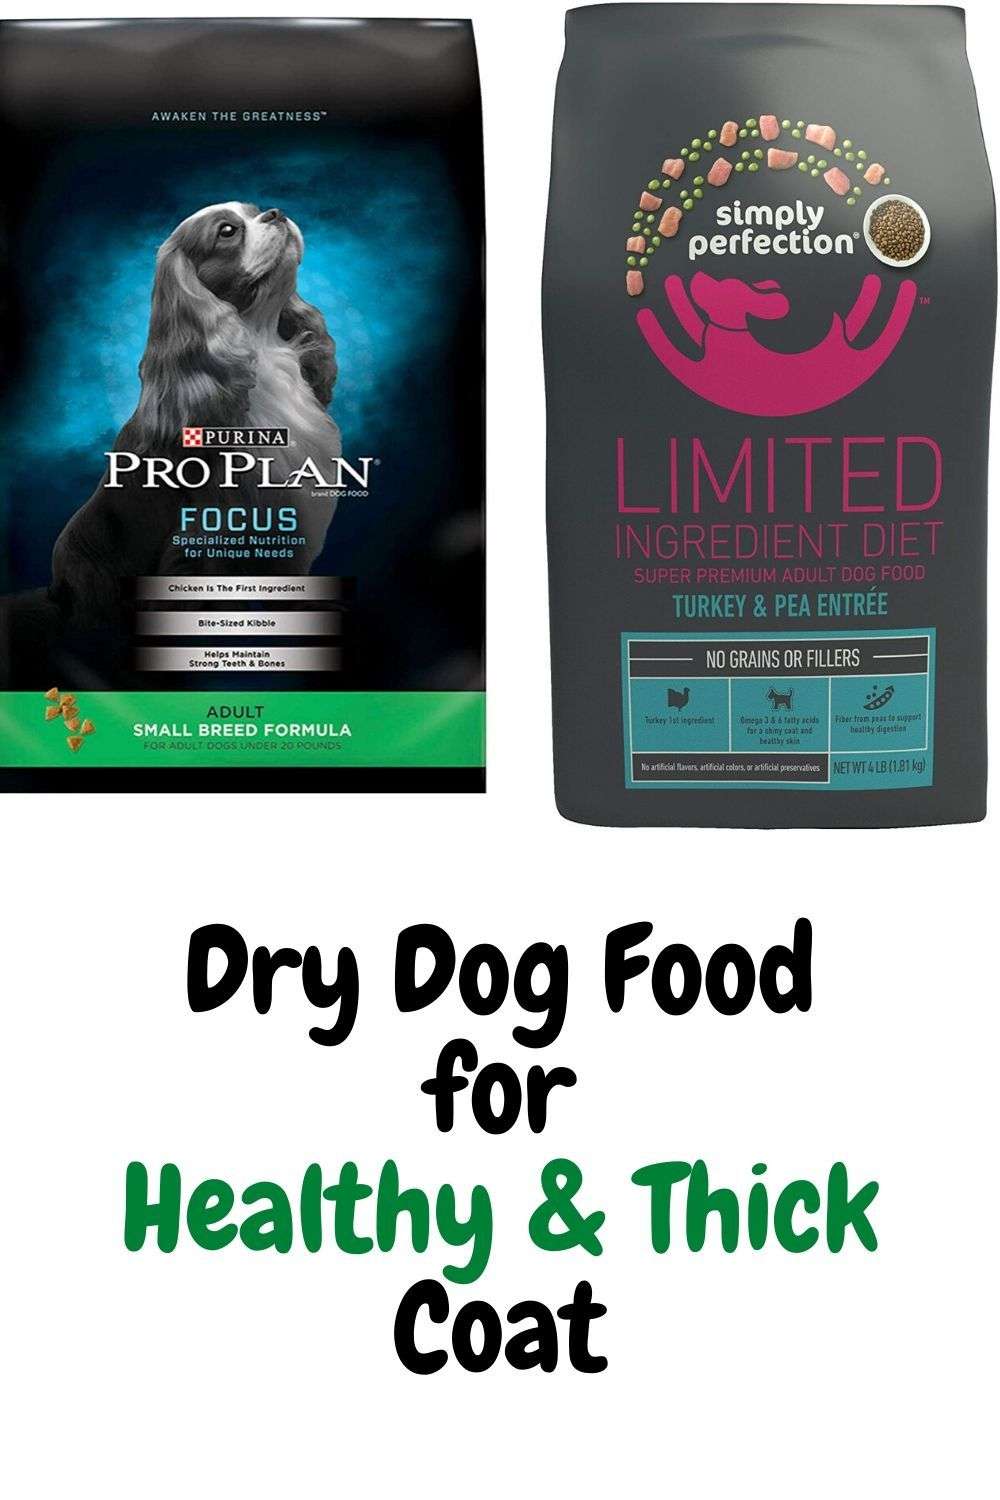 Dry Dog food for Healthy &  Thick Coat in 2020